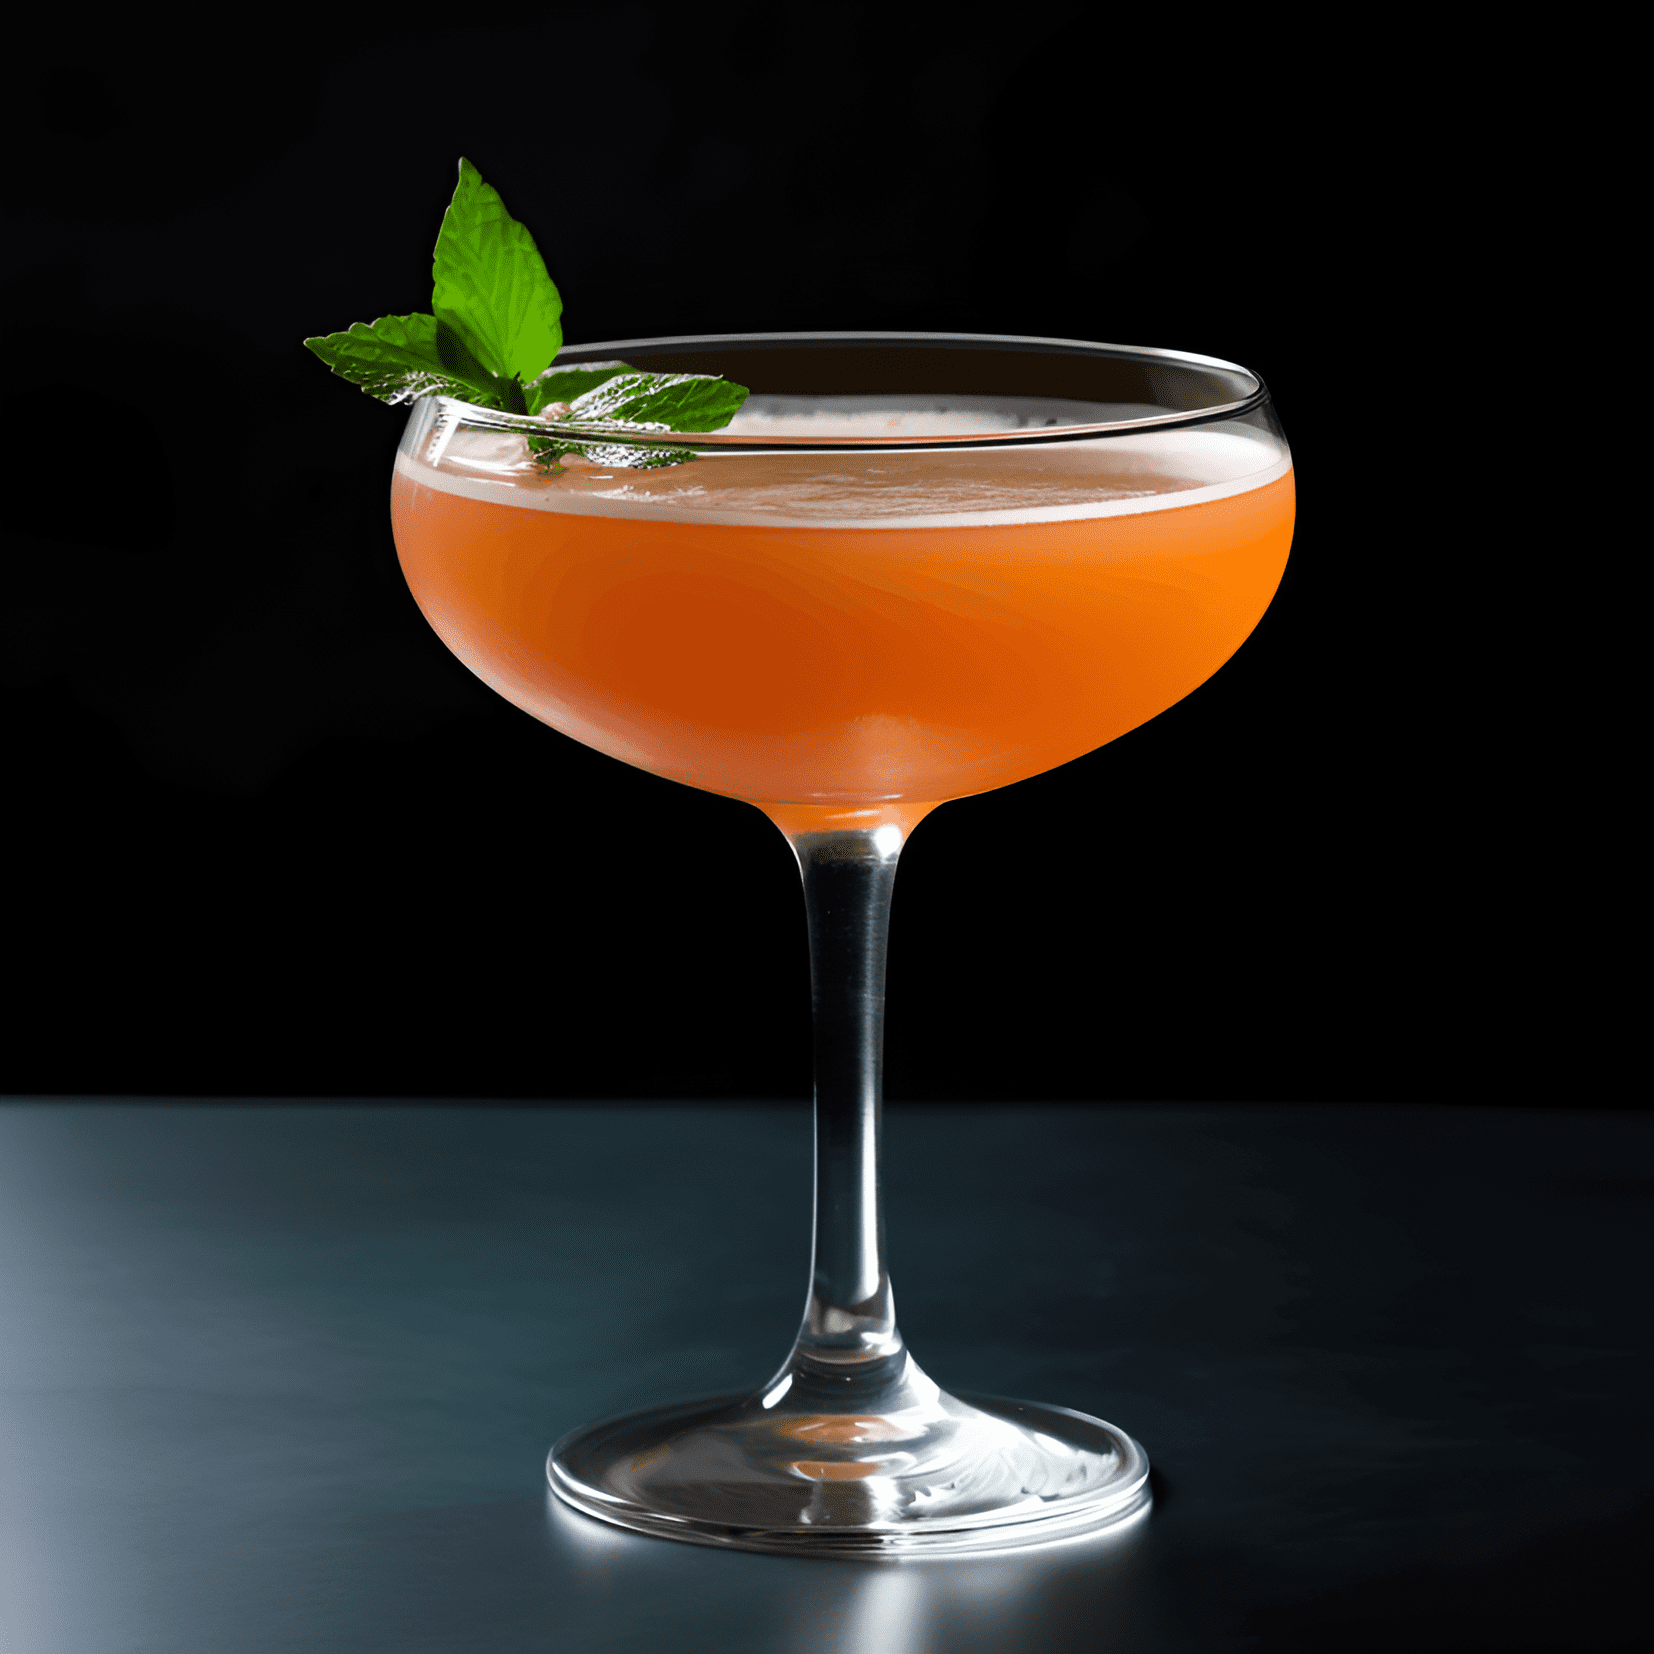 Monkey Gland Cocktail Recipe - The Monkey Gland has a complex and intriguing taste. It is a harmonious blend of sweet, sour, fruity, and herbal flavors. The gin provides a strong, juniper-forward base, while the orange juice adds a bright, citrusy sweetness. The grenadine contributes a touch of fruity sweetness, and the absinthe lends a subtle, herbal undertone.